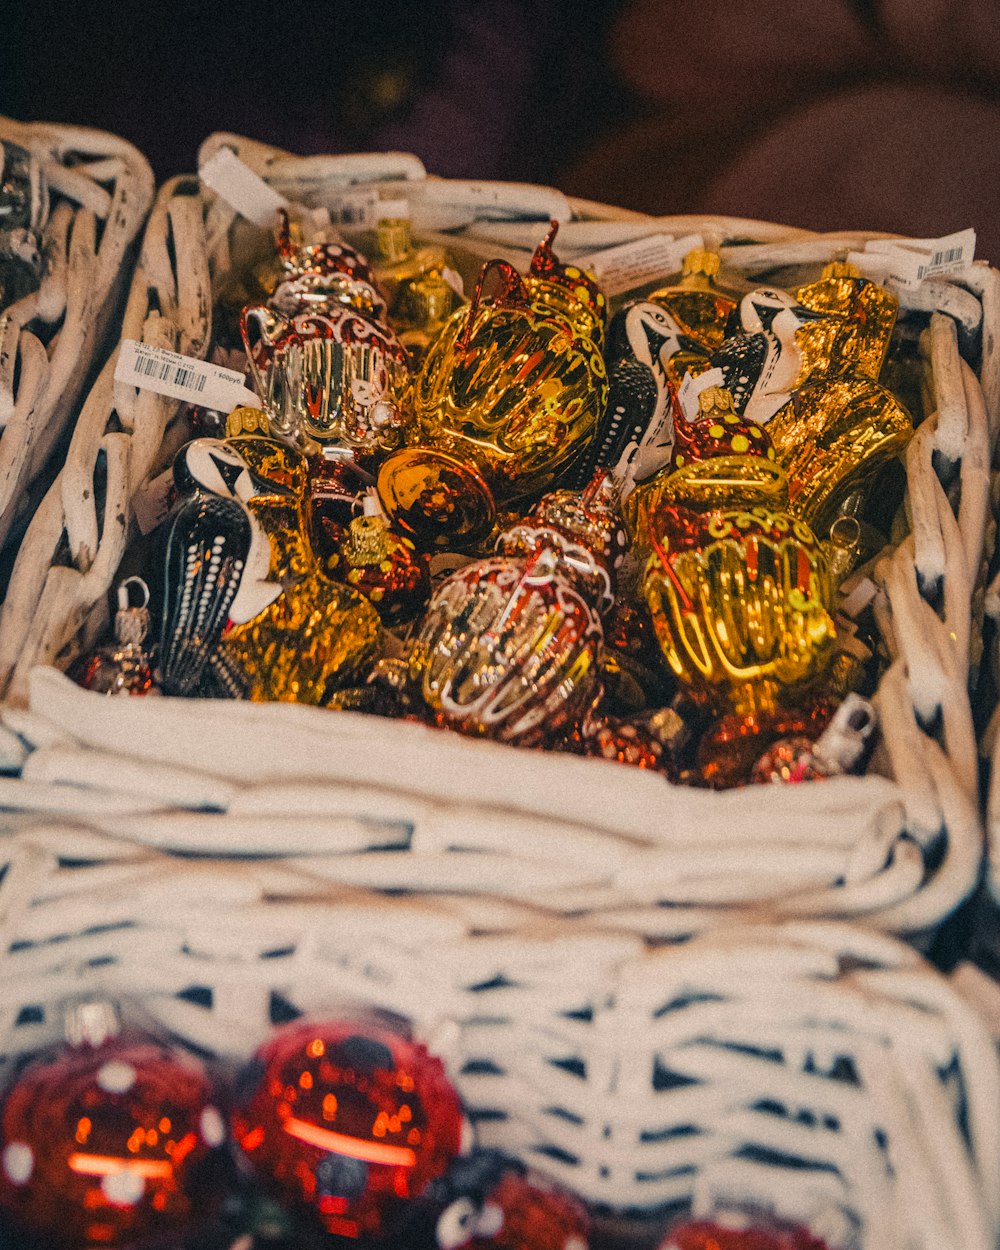 a basket filled with lots of different types of candies